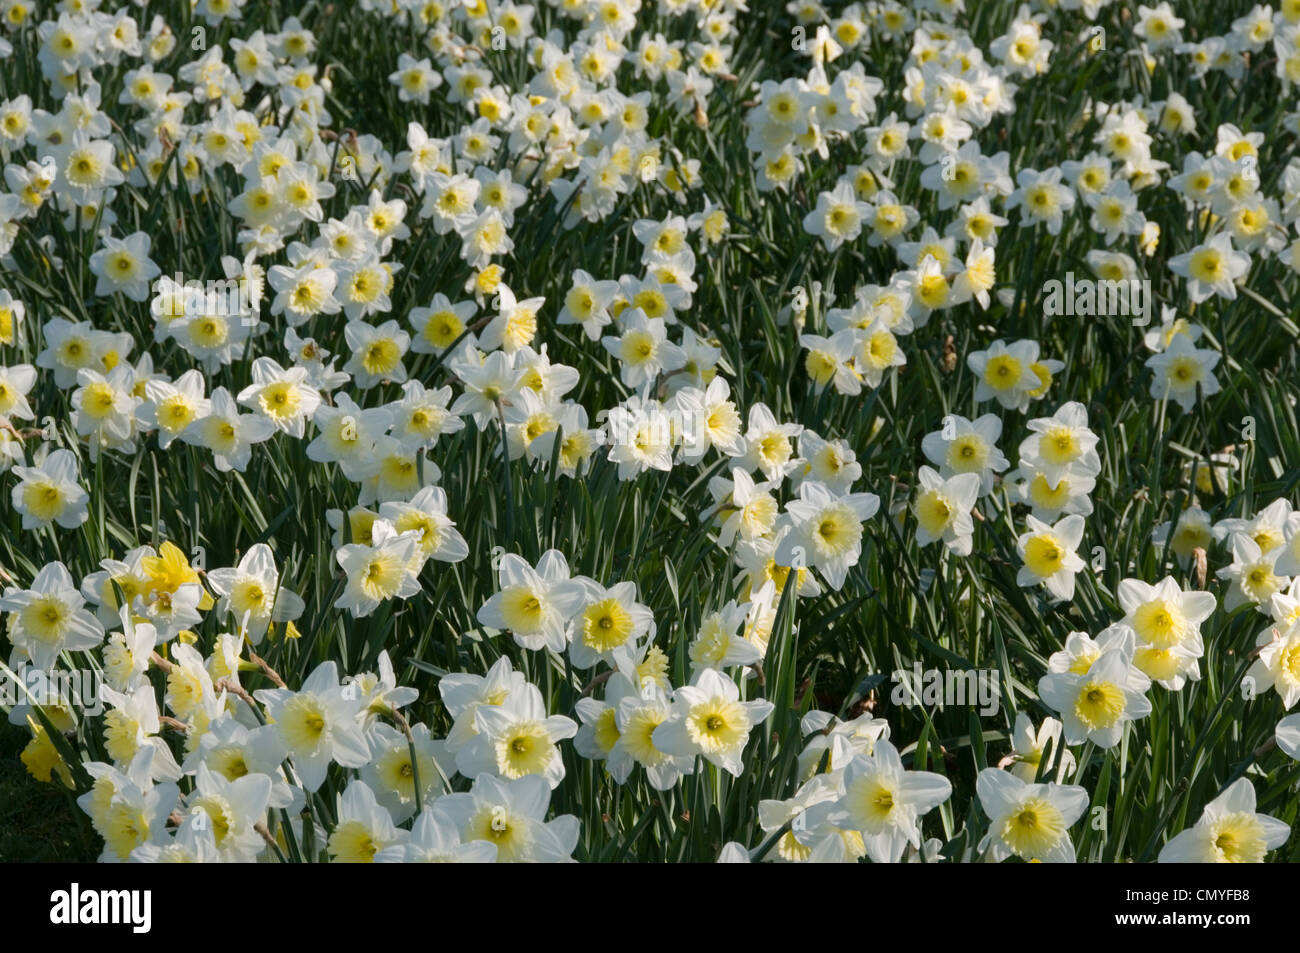 Massed daffodils in full bloom - white with yellow centers Stock Photo